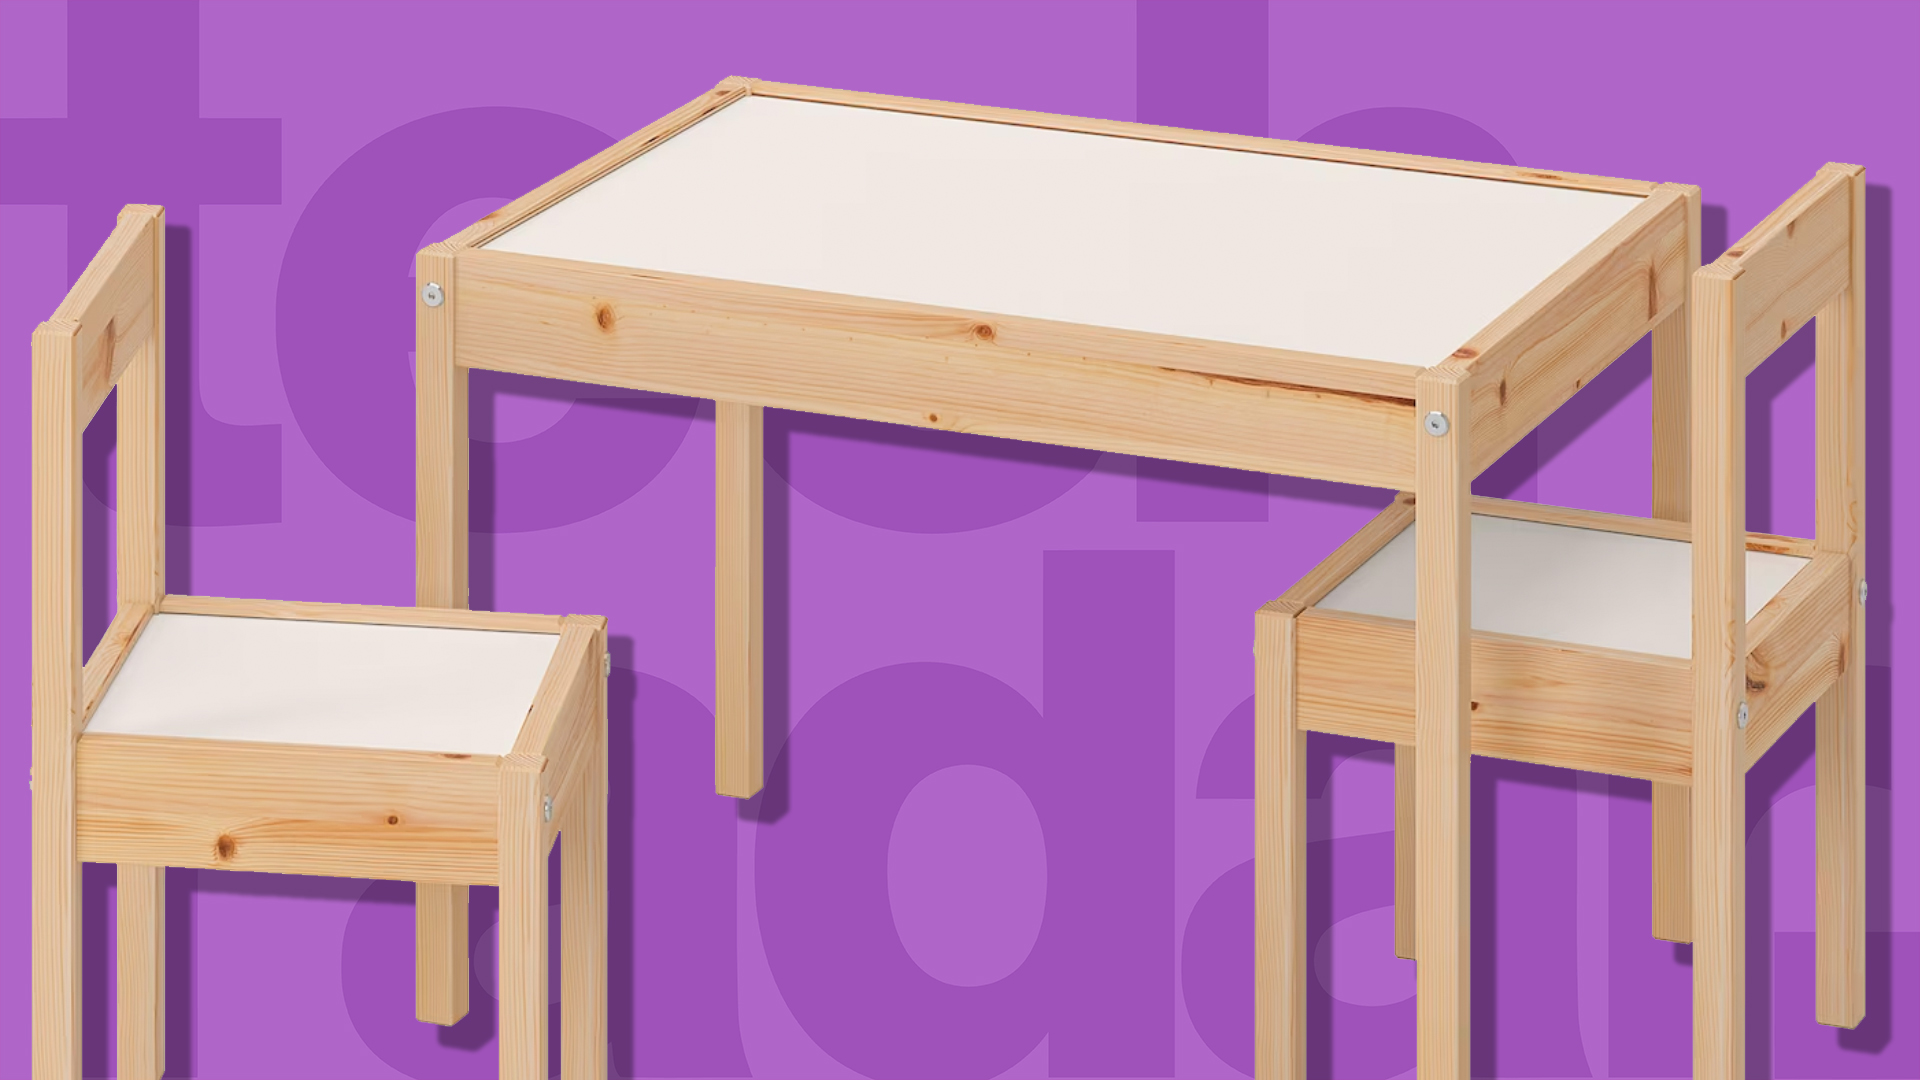 Top Study Desks for Kids Rooms or Home Office